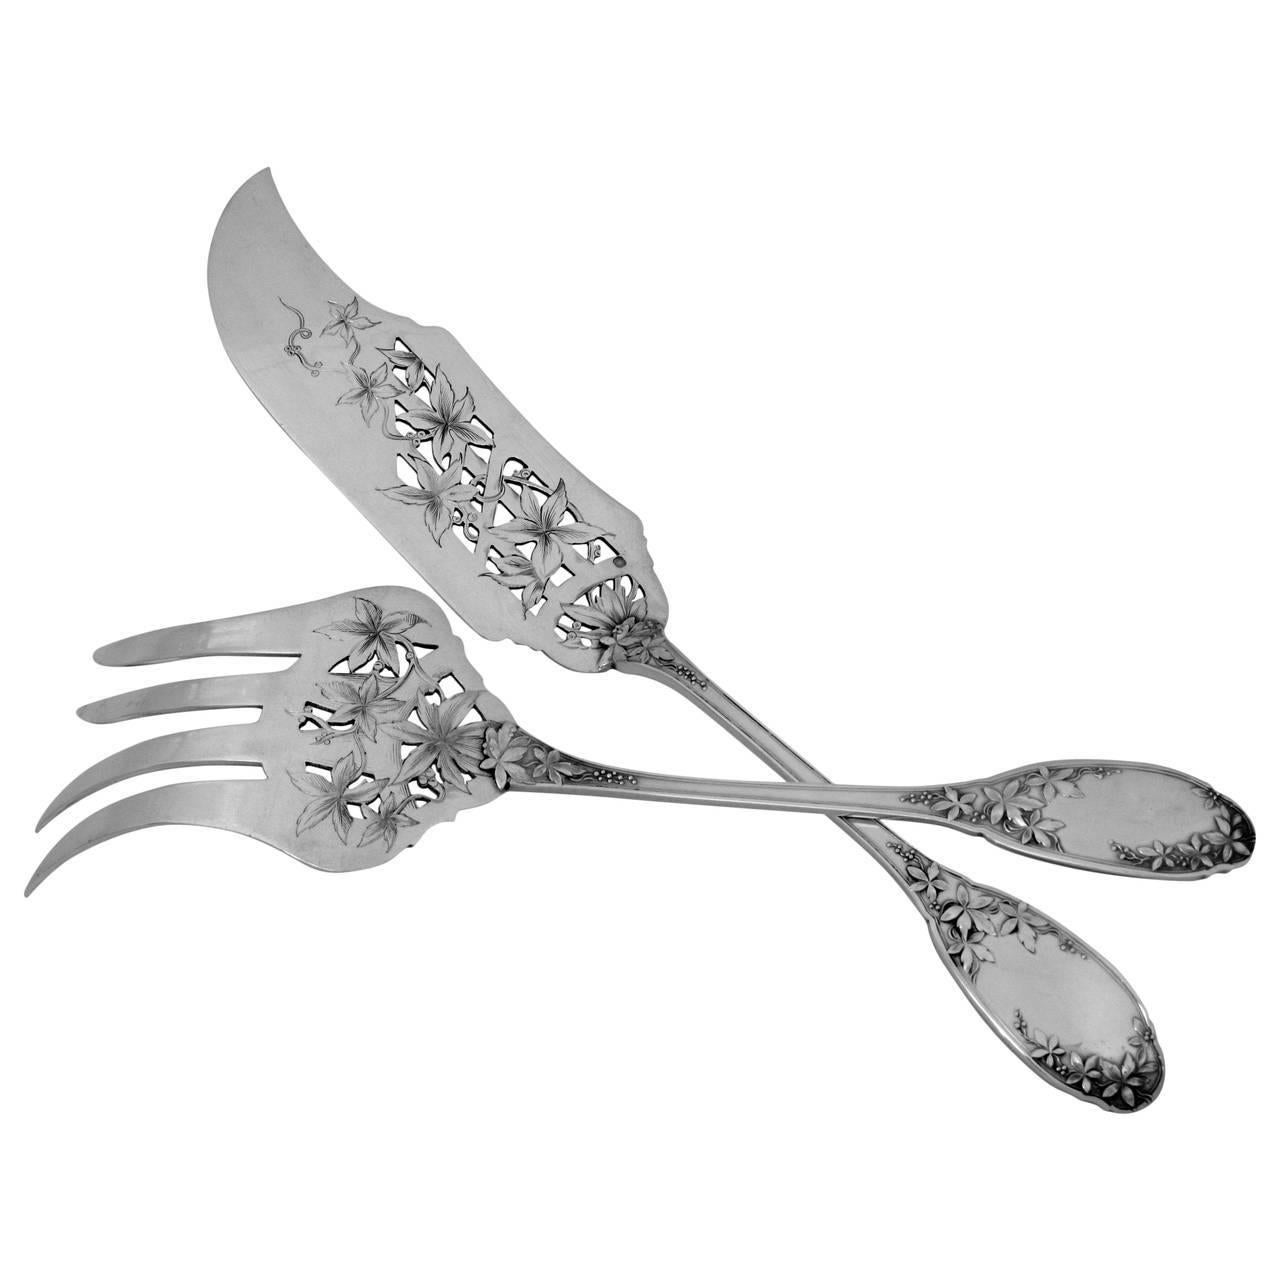 Fabulous French All Sterling Silver Fish Servers Two Pieces Vine Leaves Pattern